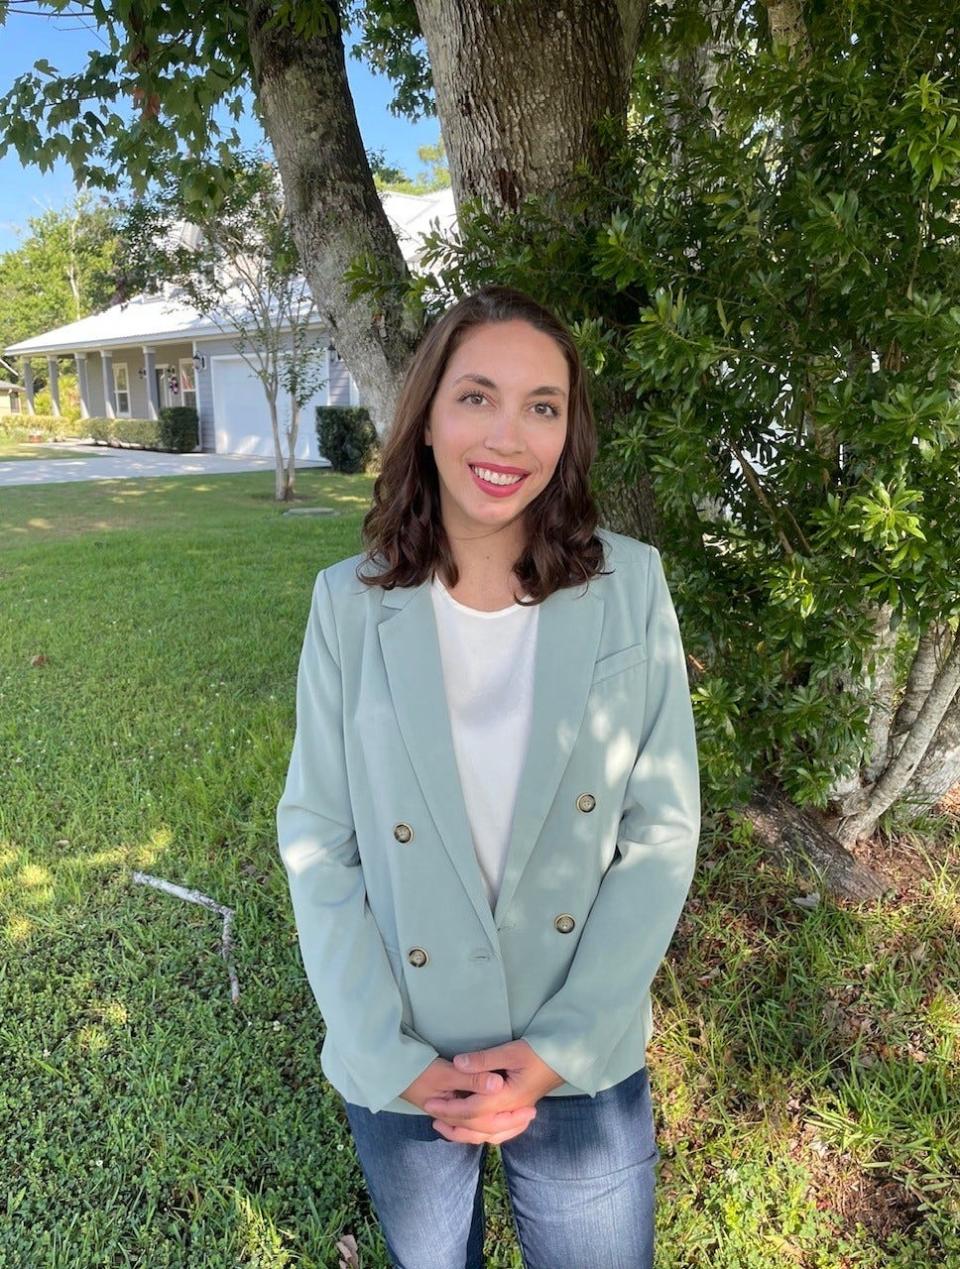 Christy Chong, 2022 candidate for Flagler County School Board District 1.